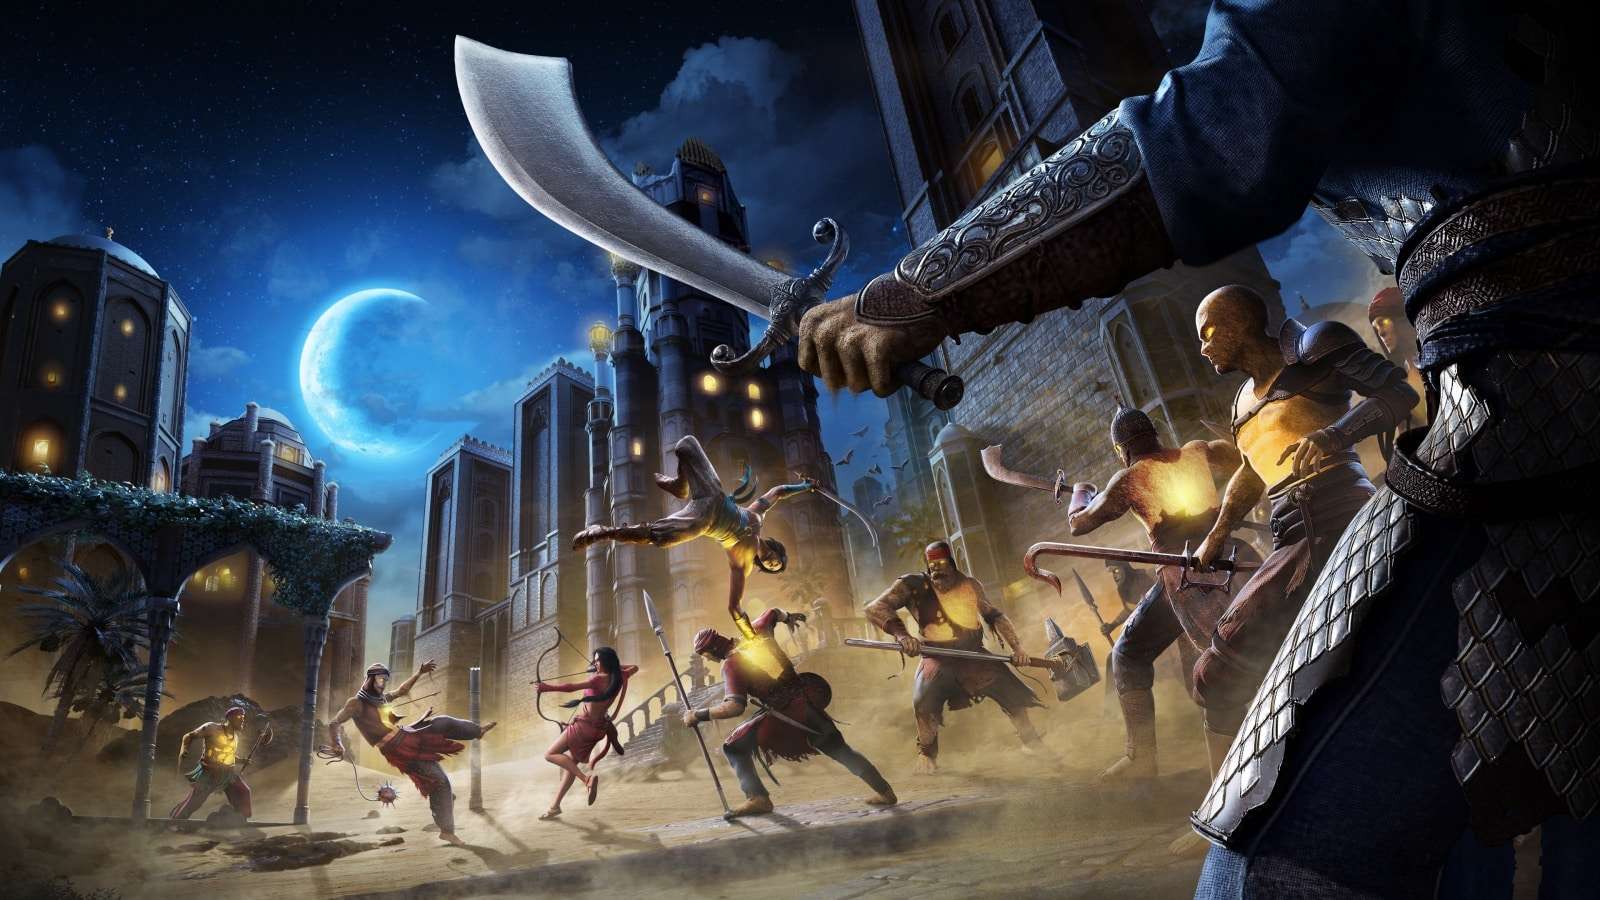 Amid reports of pre-order issues, Ubisoft has announced plans to delay the Prince of Persia: The Sands of time remake again